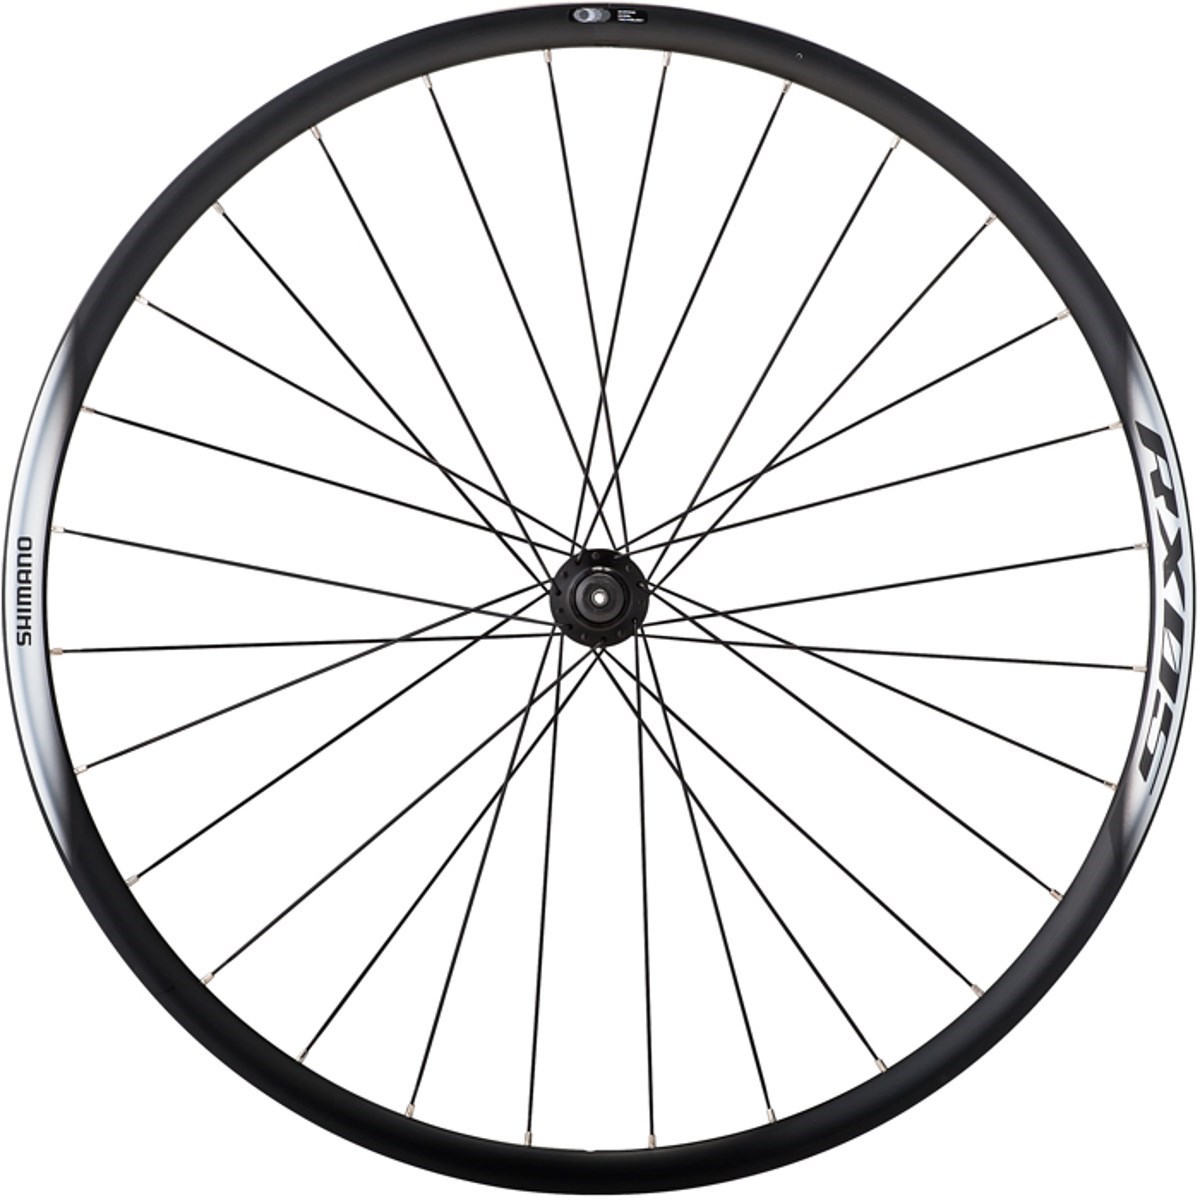 Shimano WH-RX05 Centre-Lock Disc 700C Front Wheel product image